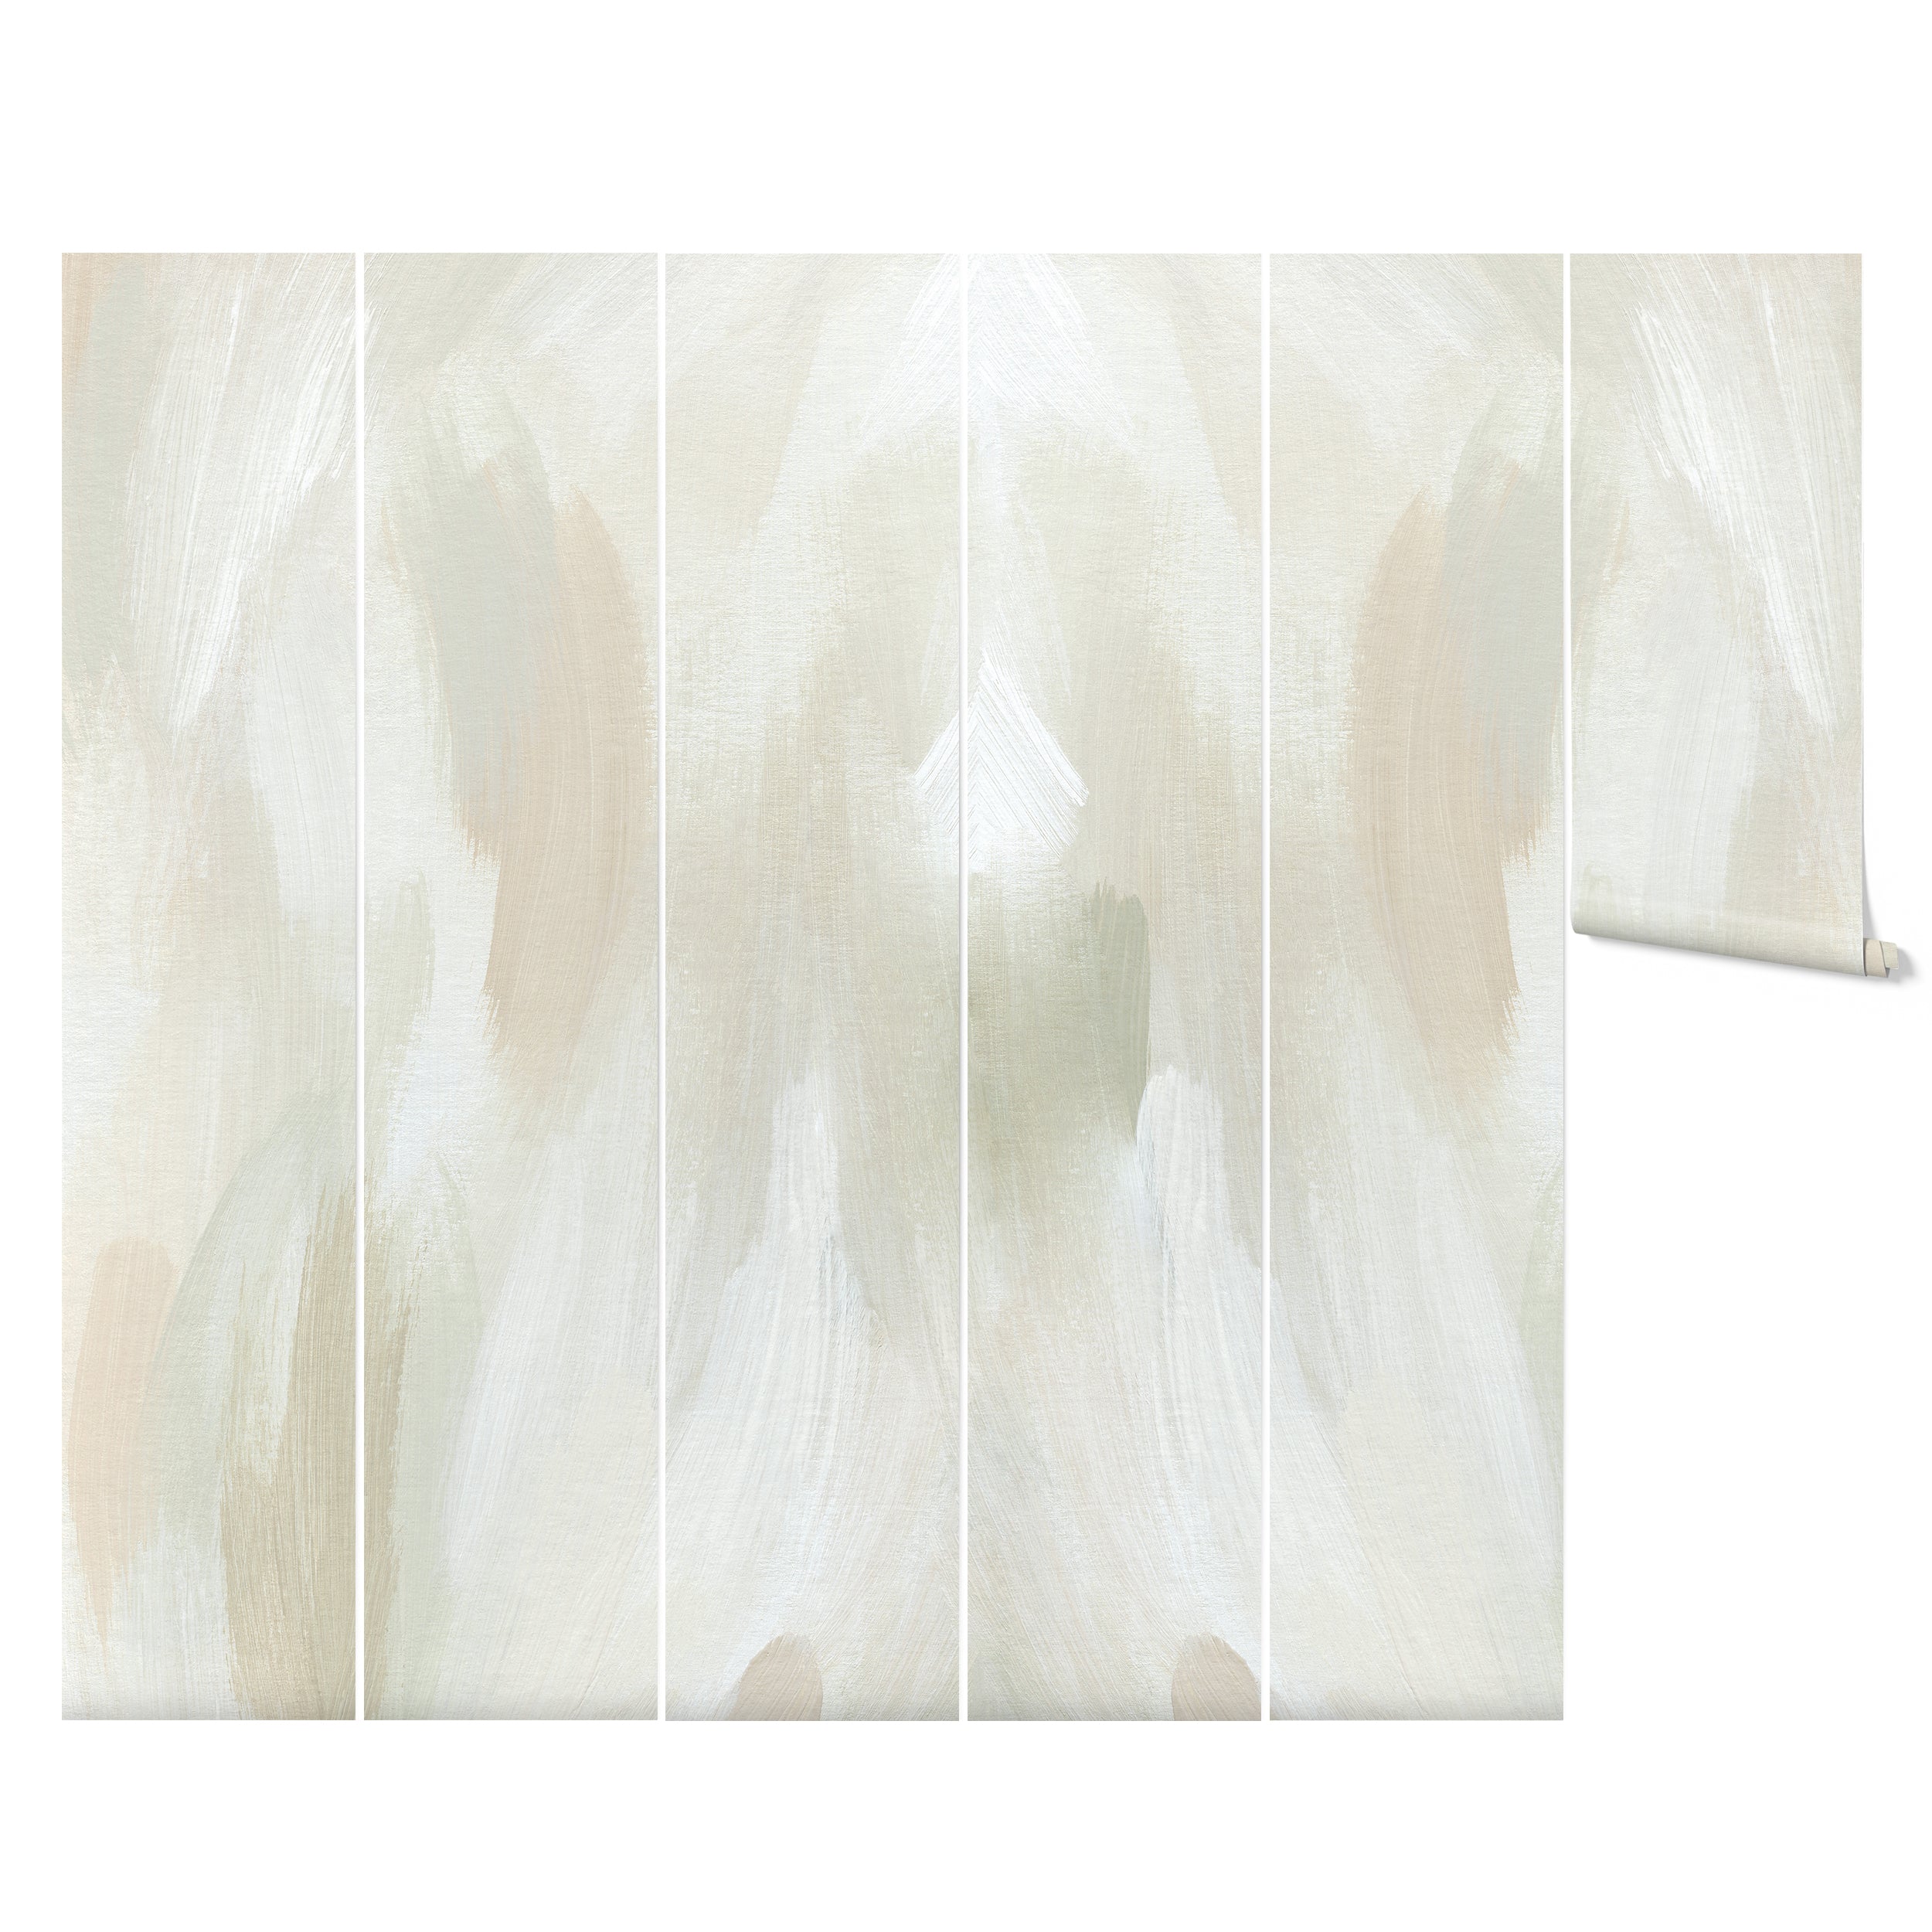 Mockup of the Earthy Aura Paint Texture Mural Wallpaper roll, displaying the abstract brushstroke pattern in soft, earthy tones, ideal for adding a touch of natural elegance to any interior space.